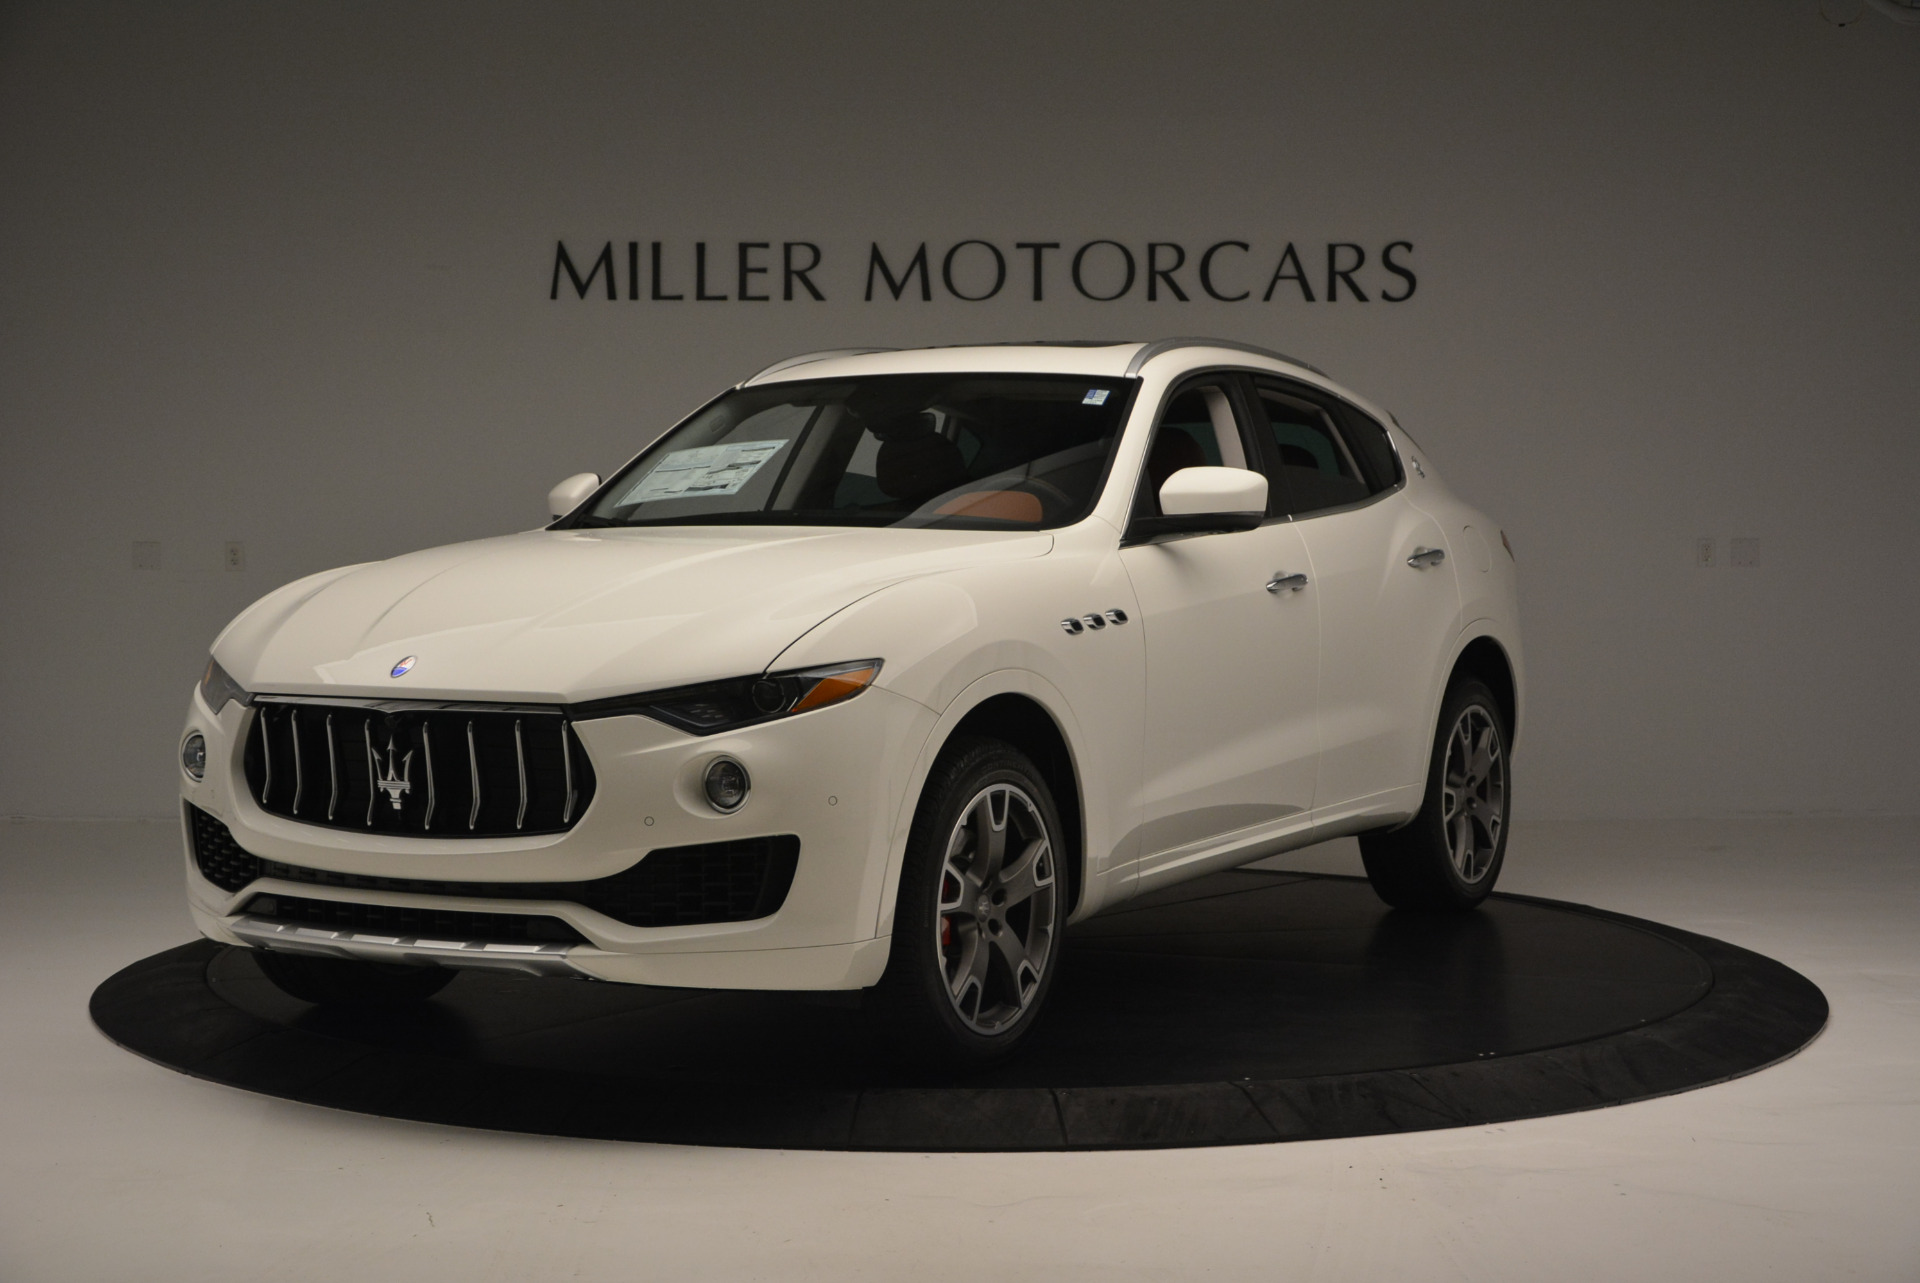 New 2017 Maserati Levante for sale Sold at Rolls-Royce Motor Cars Greenwich in Greenwich CT 06830 1